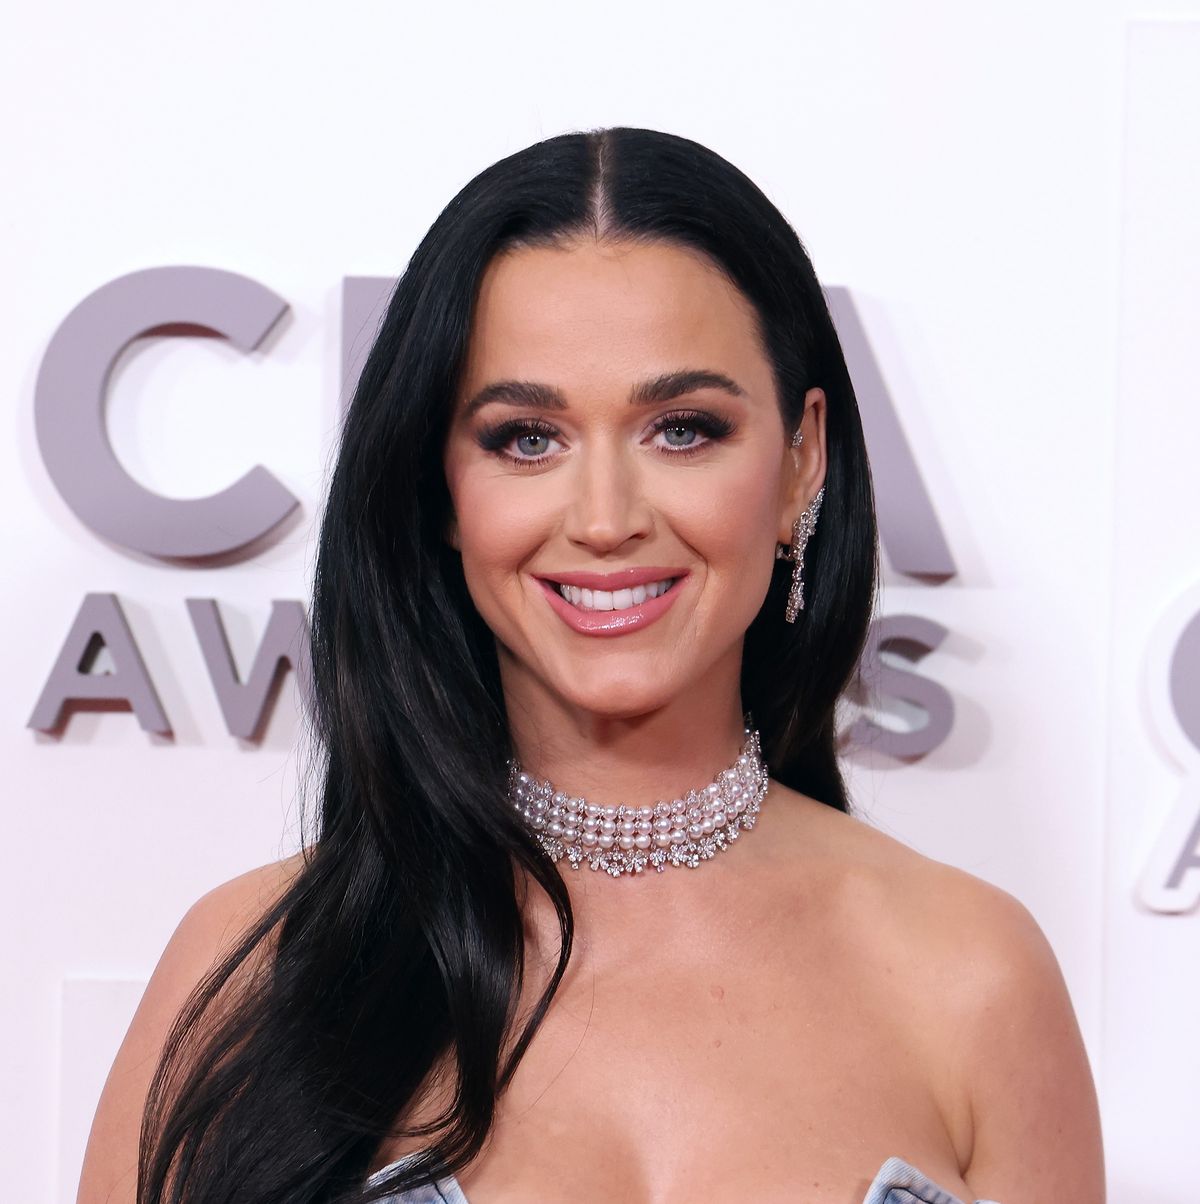 Did Katy Perry Wear a BumpIt in Her Hair Yesterday?